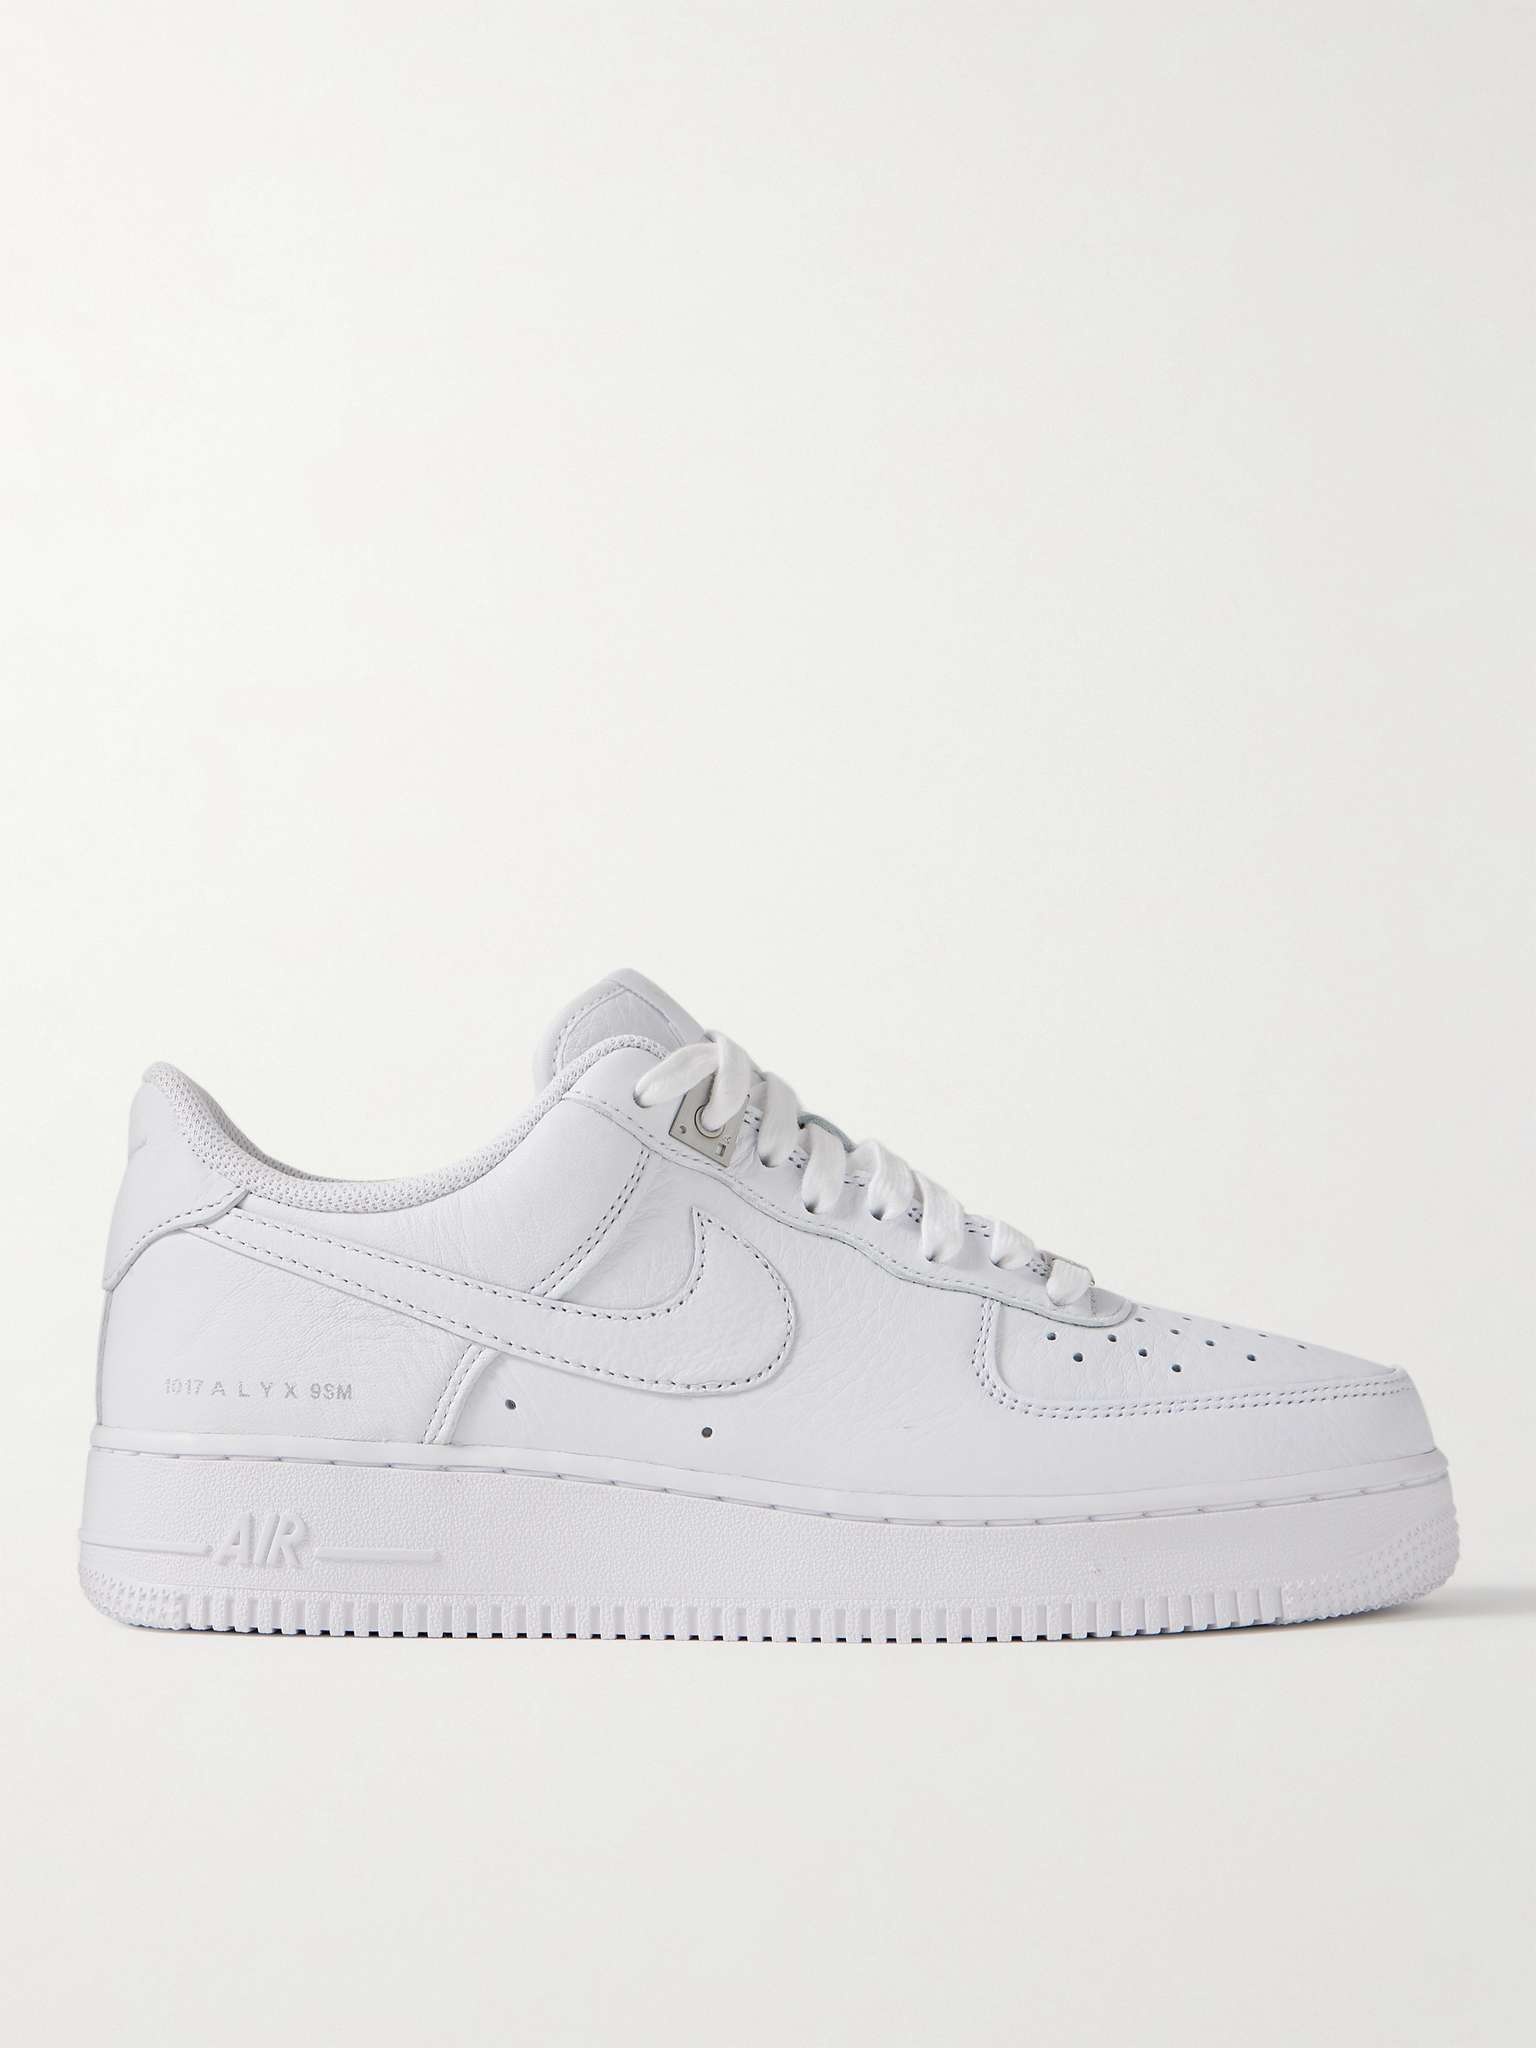 + 1017 ALYX 9SM Air Force 1 SP Leather Sneakers - 1